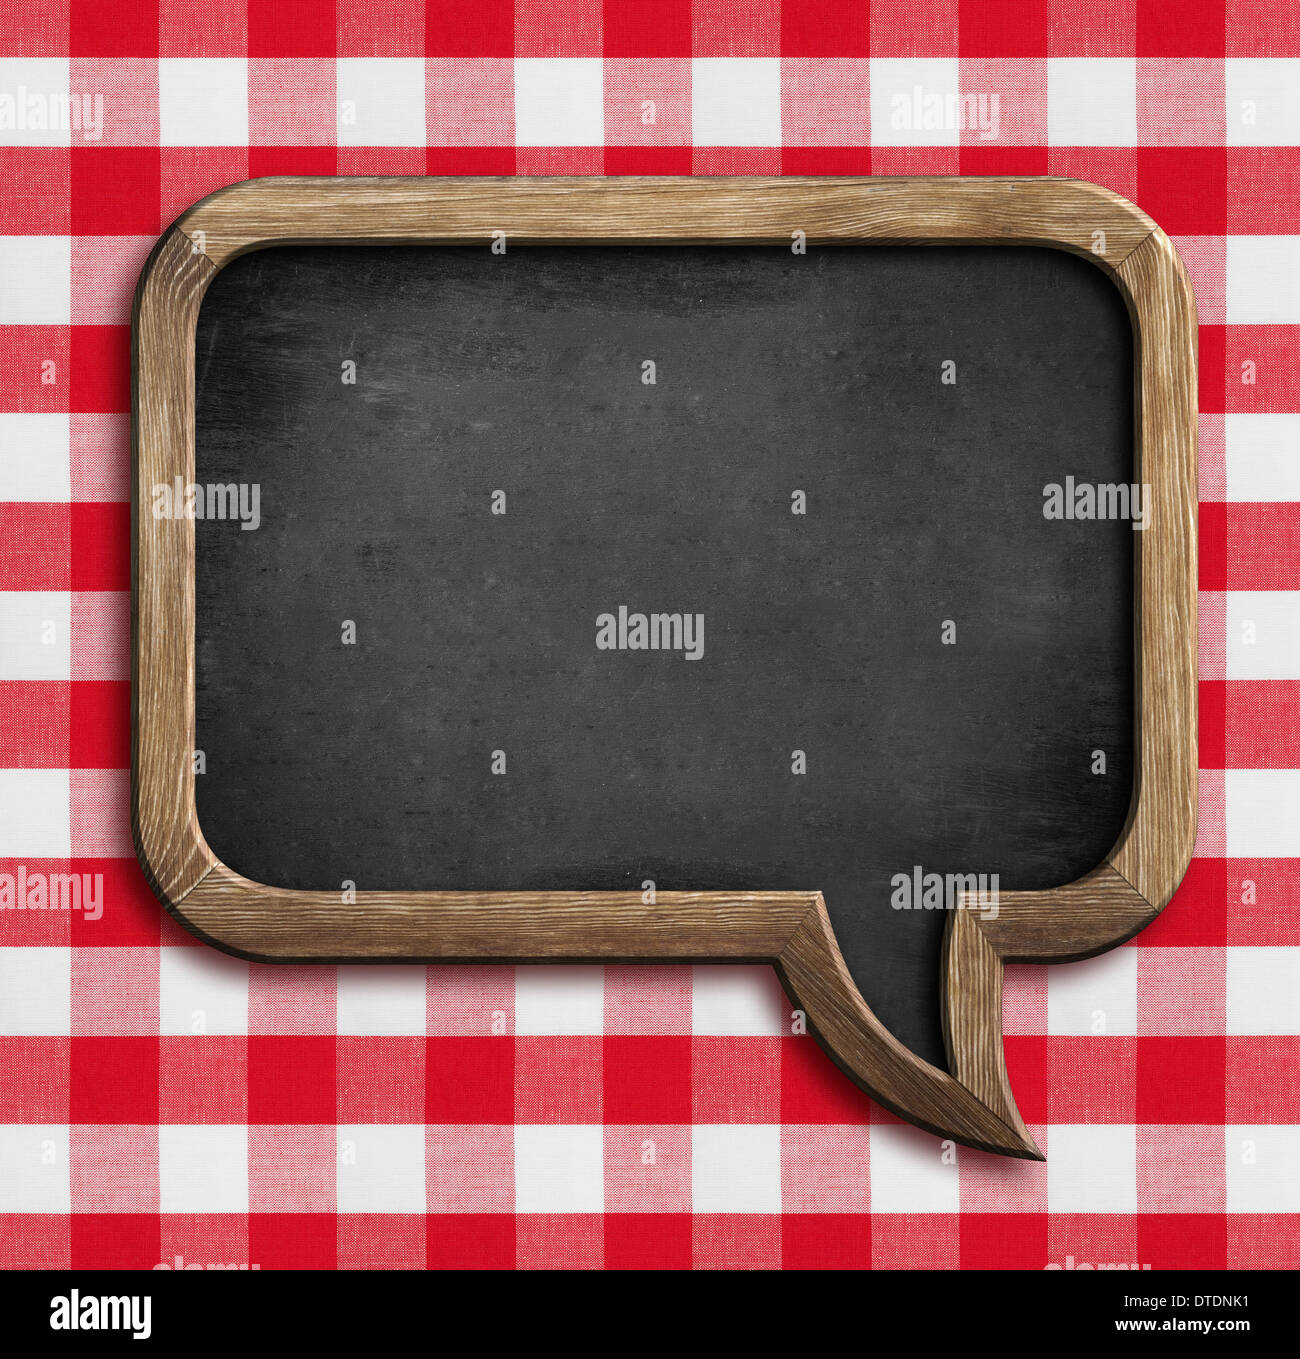 menu chalkboard speech bubble on table with picnic tablecloth Stock Photo